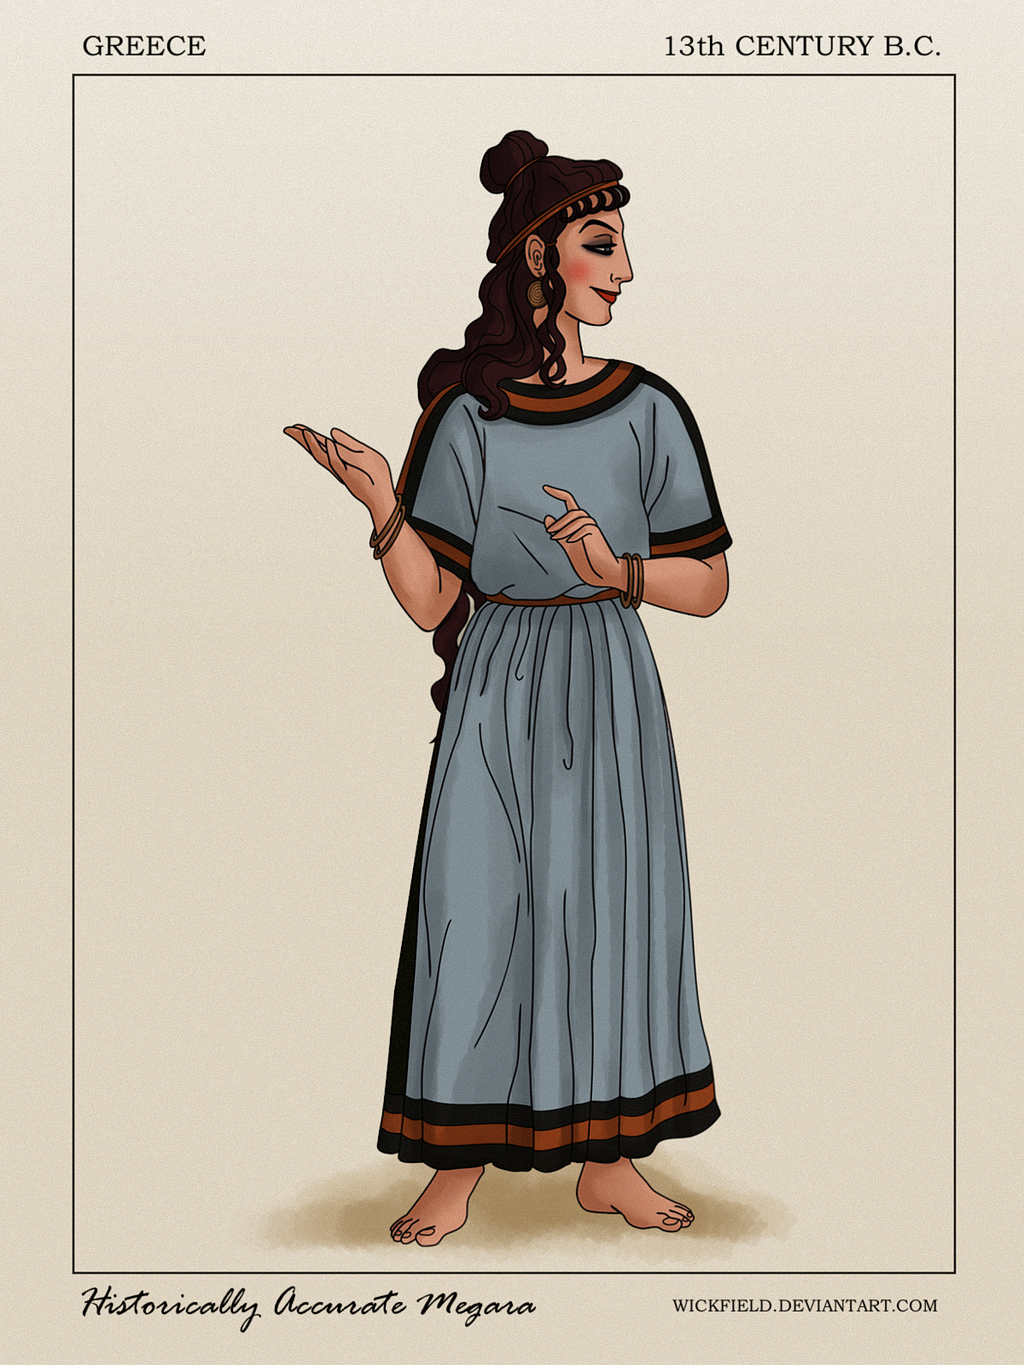 Historically Accurate Megara by Wickfield on DeviantArt